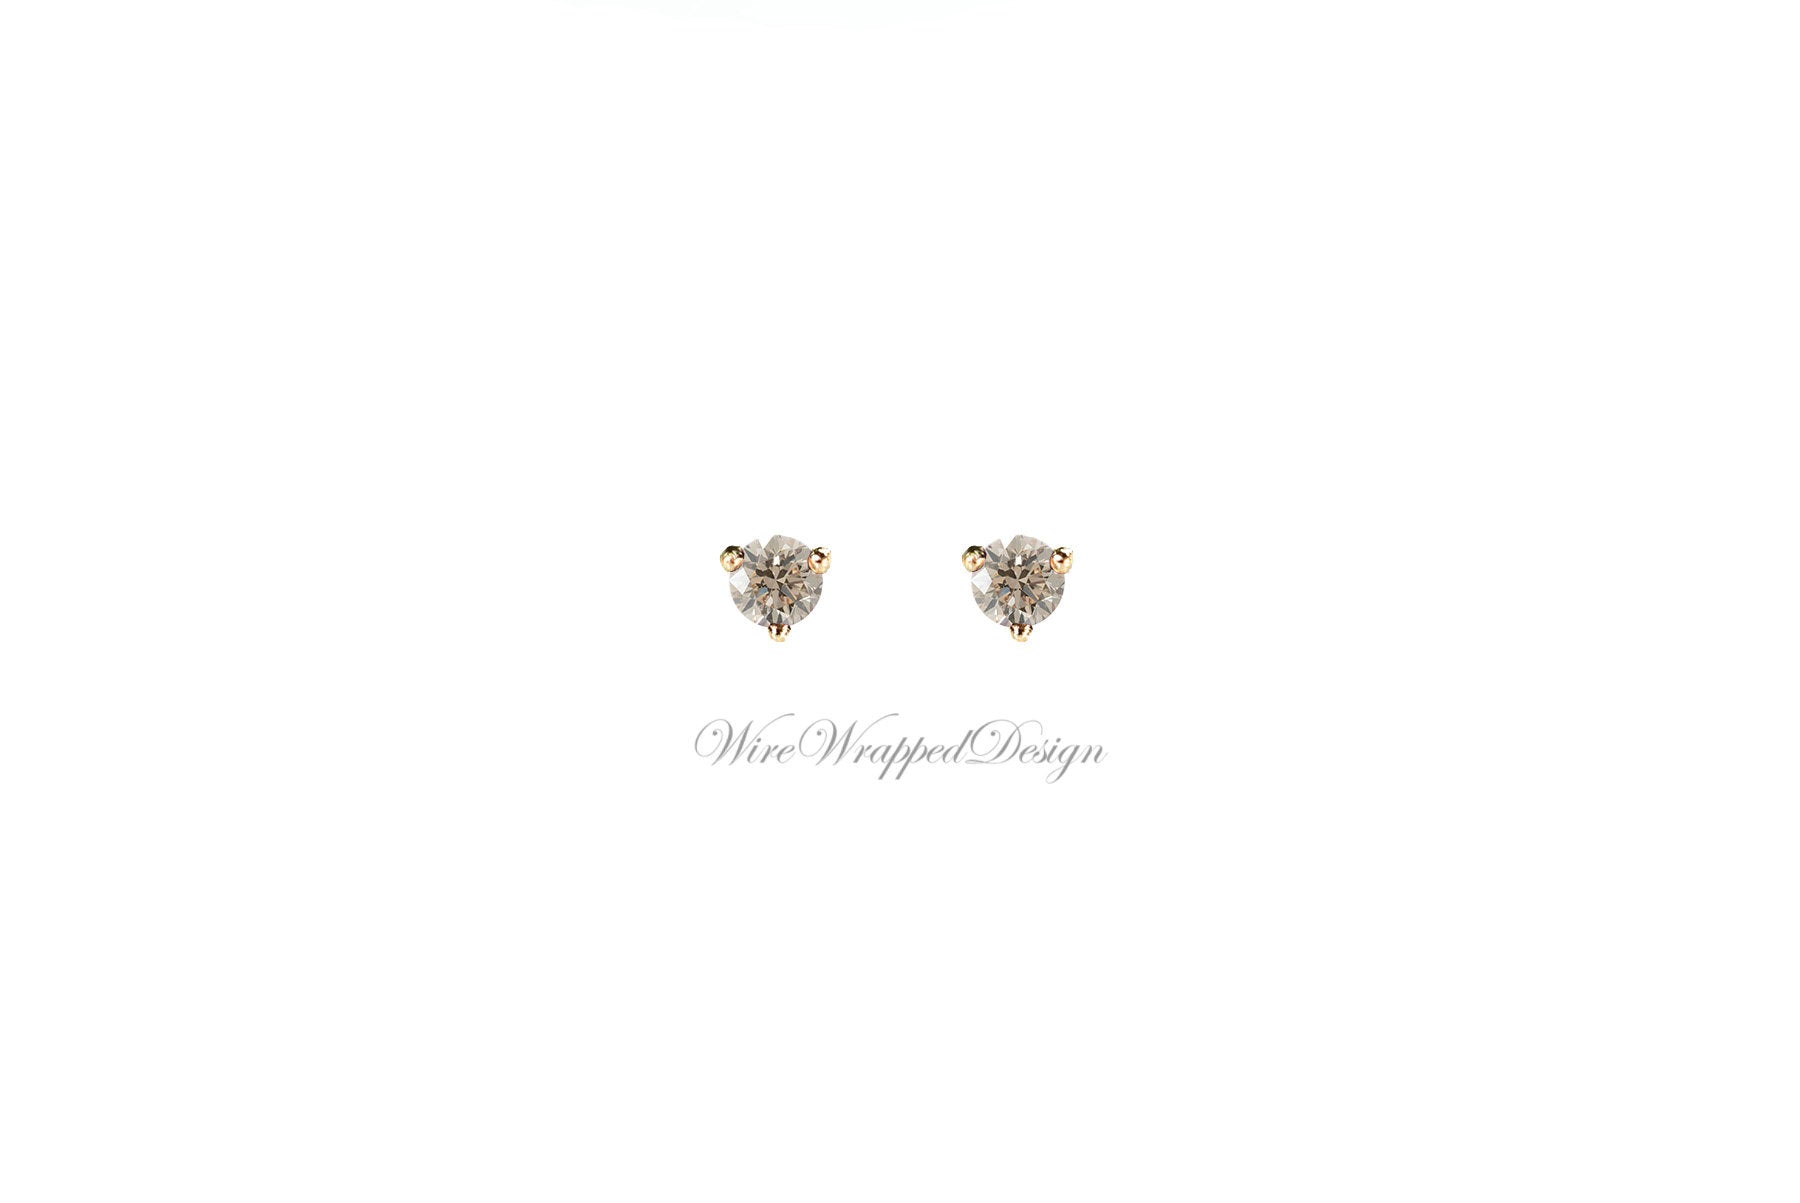 PAIR Genuine Top Light BROWN DIAMOND Earrings Studs 3mm 0.2tcw Martini 14k Solid Gold (Yellow, Rose, White) Platinum Silver Cartilage Tragus